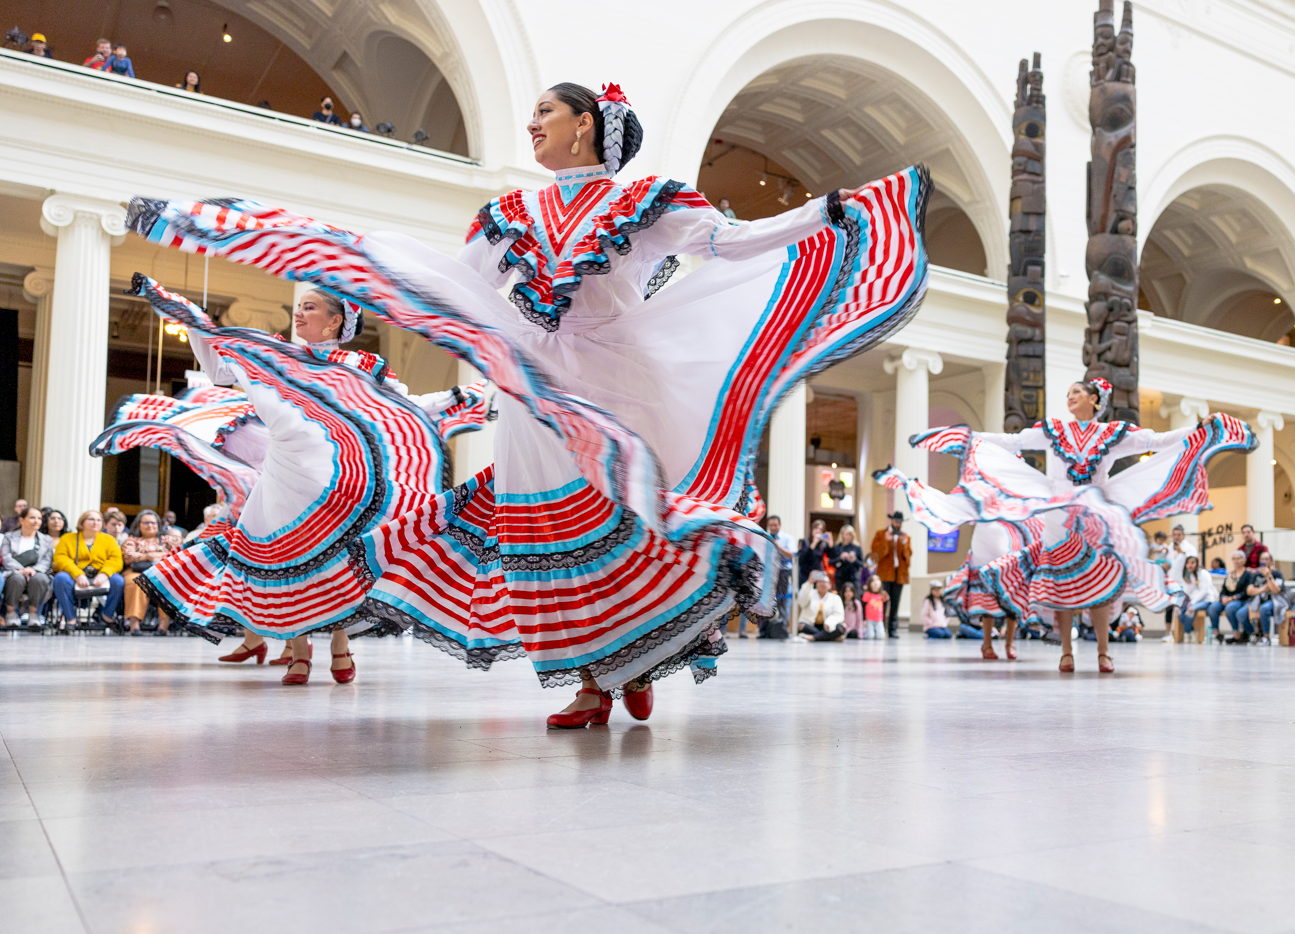 Women wearing traditional clothing dance in the museum's main hall